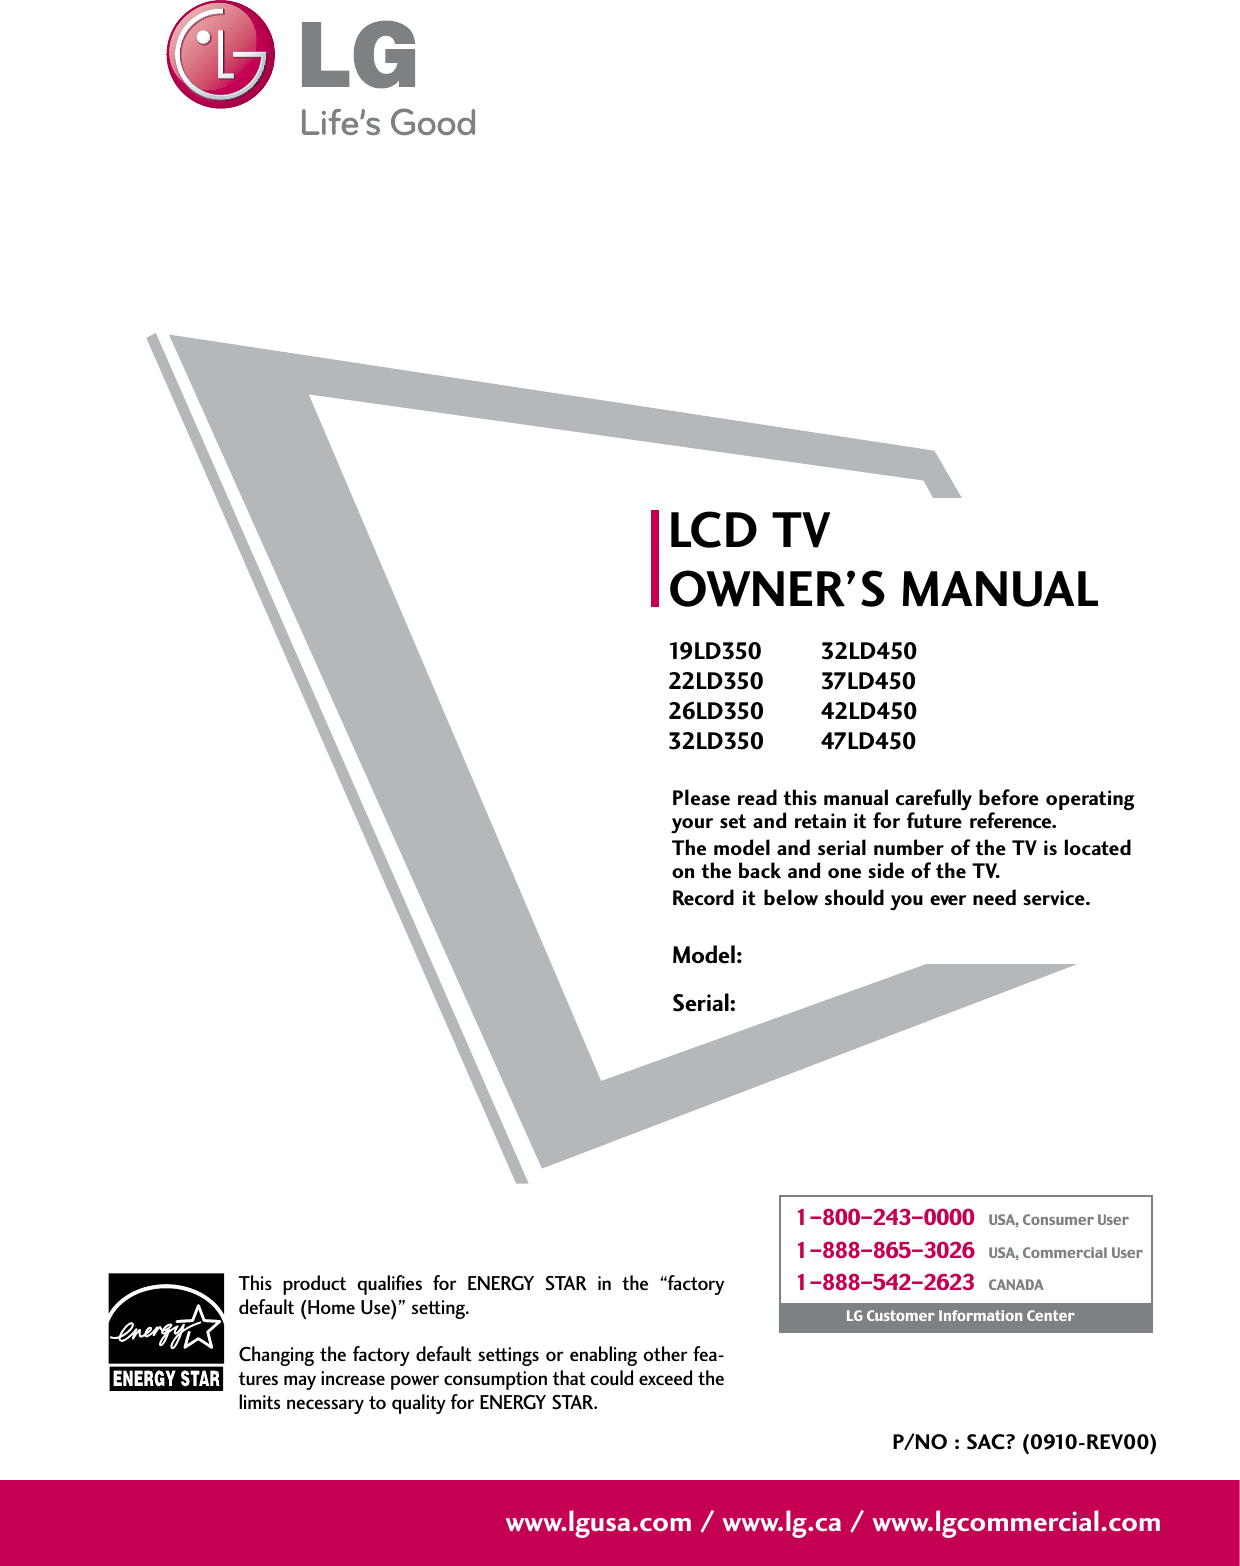 Please read this manual carefully before operatingyour set and retain it for future reference.The model and serial number of the TV is locatedon the back and one side of the TV. Record it below should you ever need service.Model:Serial:LCD TVOWNER’S MANUAL19 L D 35022LD35026LD35032LD35032LD45037LD45042LD45047LD450P/NO : SAC? (0910-REV00)www.lgusa.com / www.lg.ca / www.lgcommercial.comThis  product  qualifies  for  ENERGY  STAR  in  the  “factorydefault (Home Use)” setting.Changing the factory default settings or enabling other fea-tures may increase power consumption that could exceed thelimits necessary to quality for ENERGY STAR.1-800-243-0000   USA, Consumer User1-888-865-3026   USA, Commercial User1-888-542-2623   CANADALG Customer Information Center